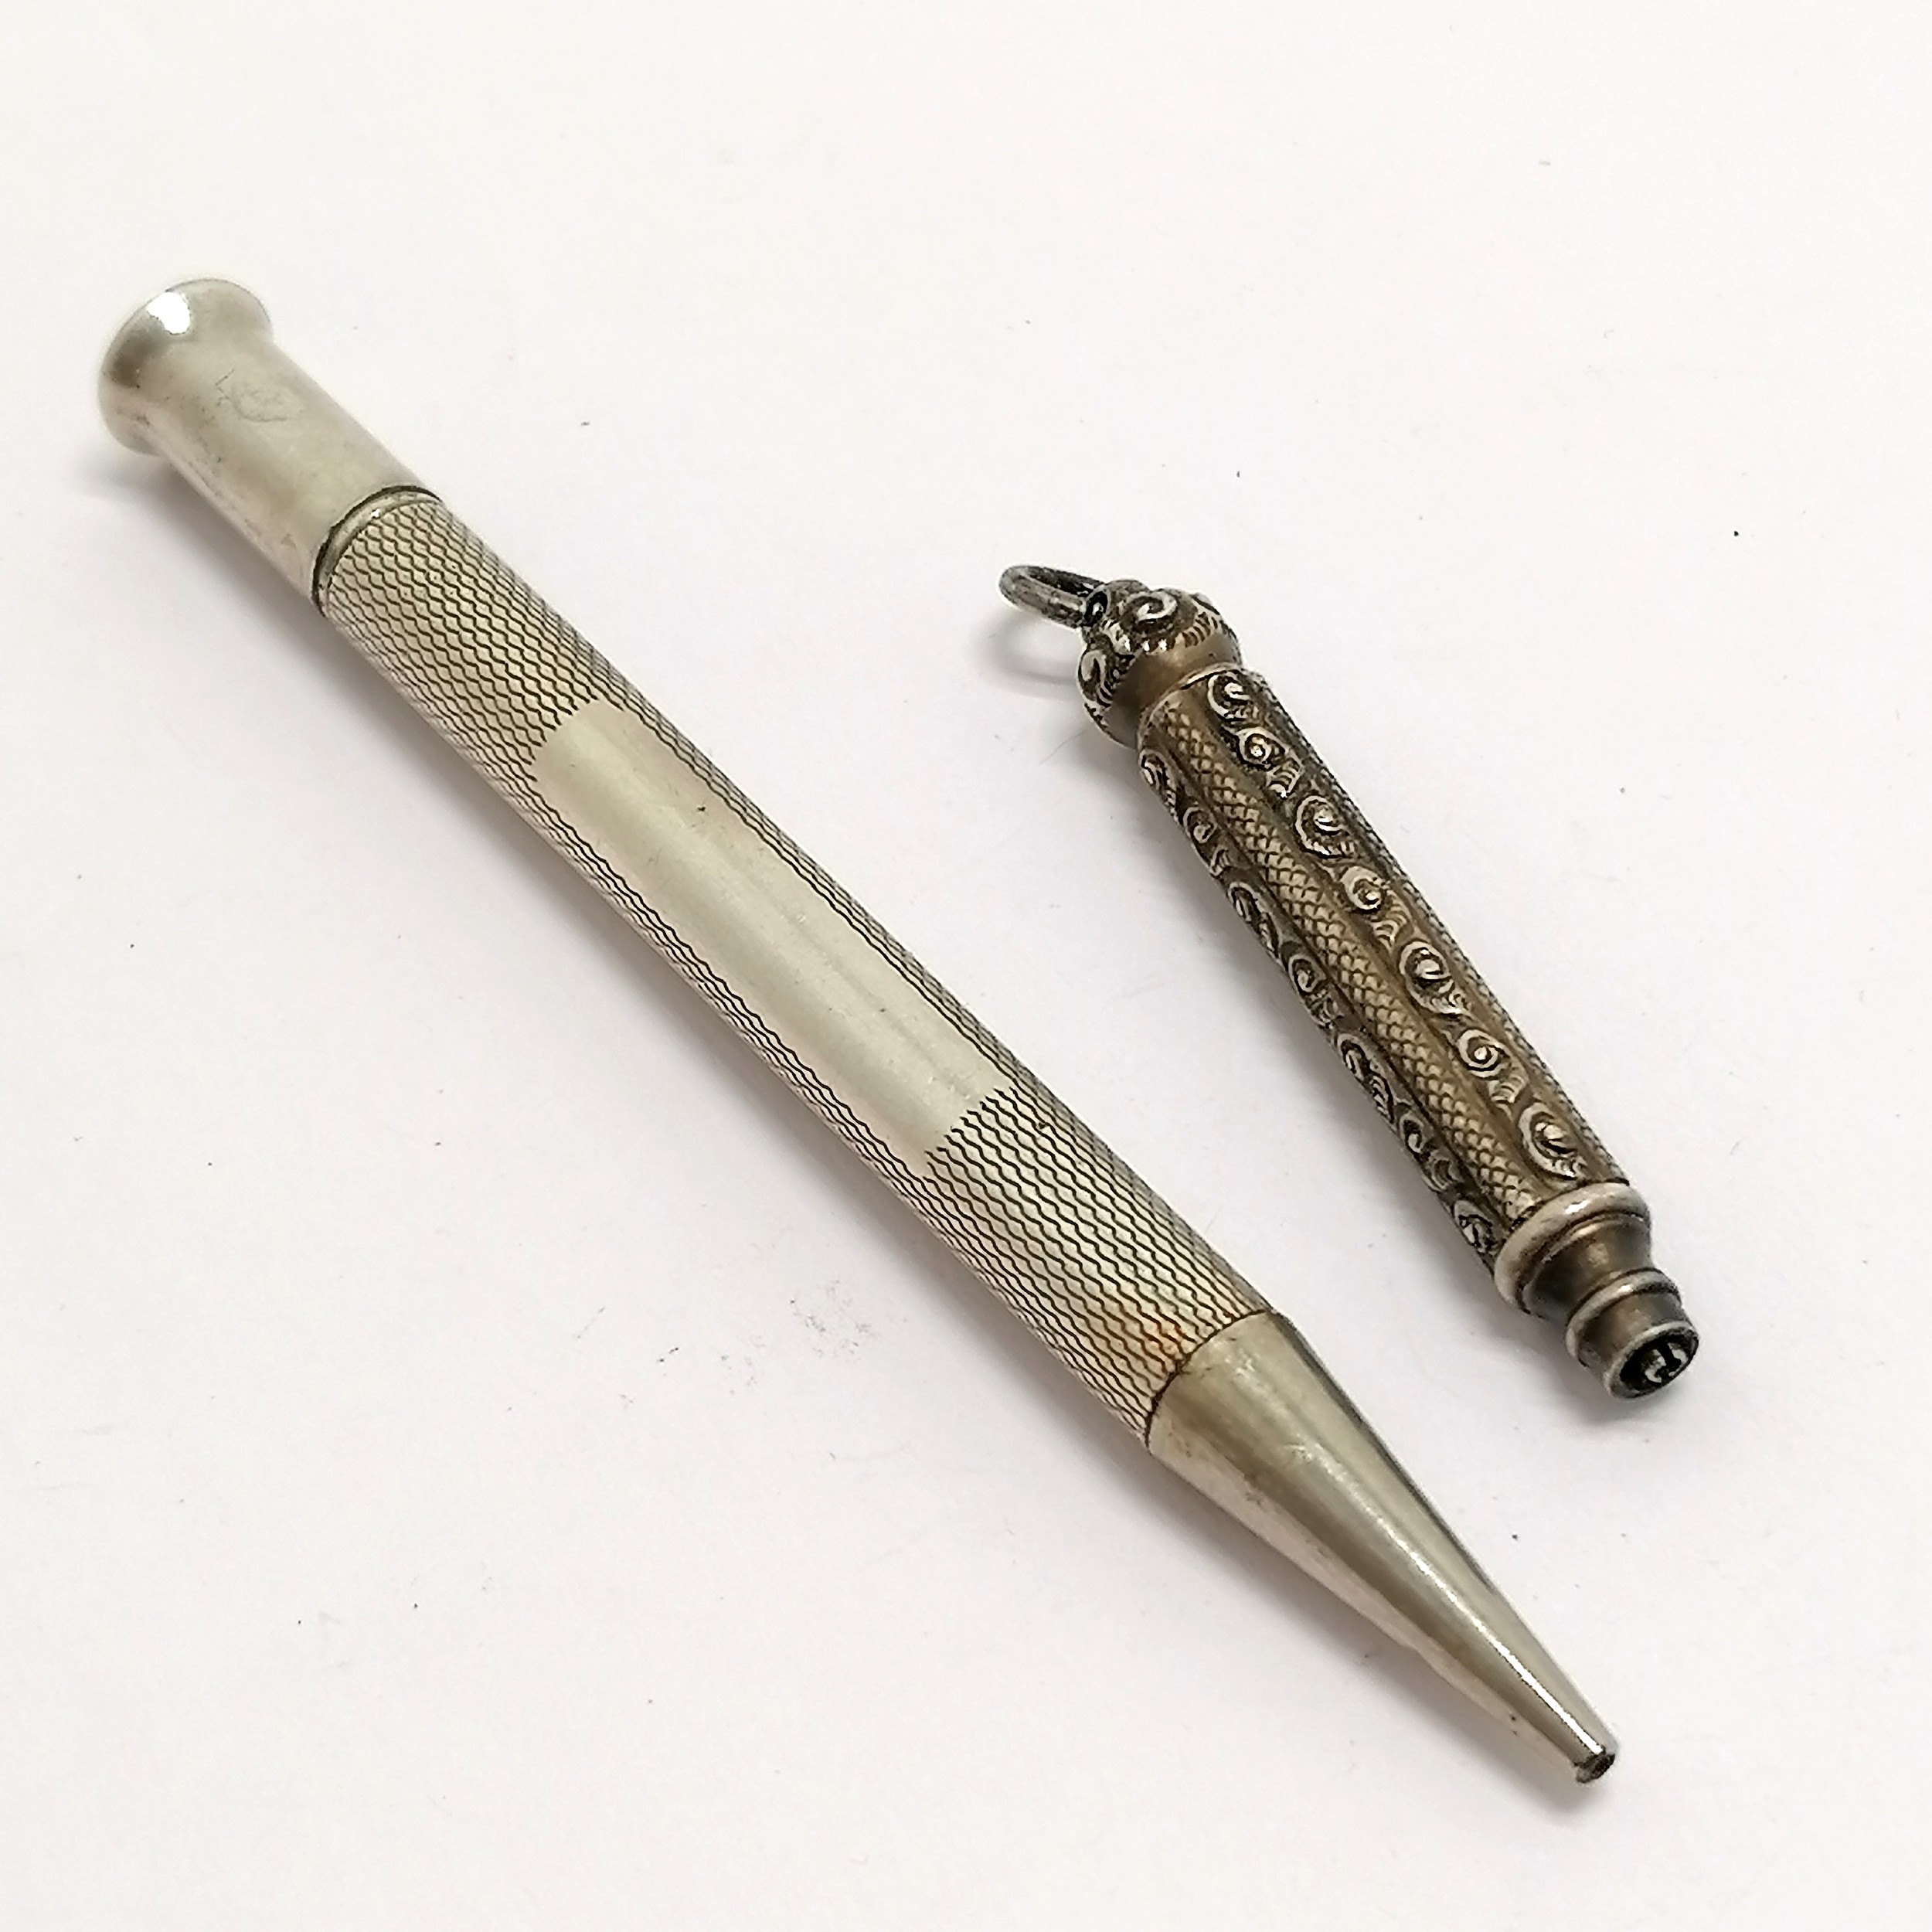 W S Hicks New York unmarked silver propelling pencil (8.5cm) t/w W M Ltd silver propelling pencil (